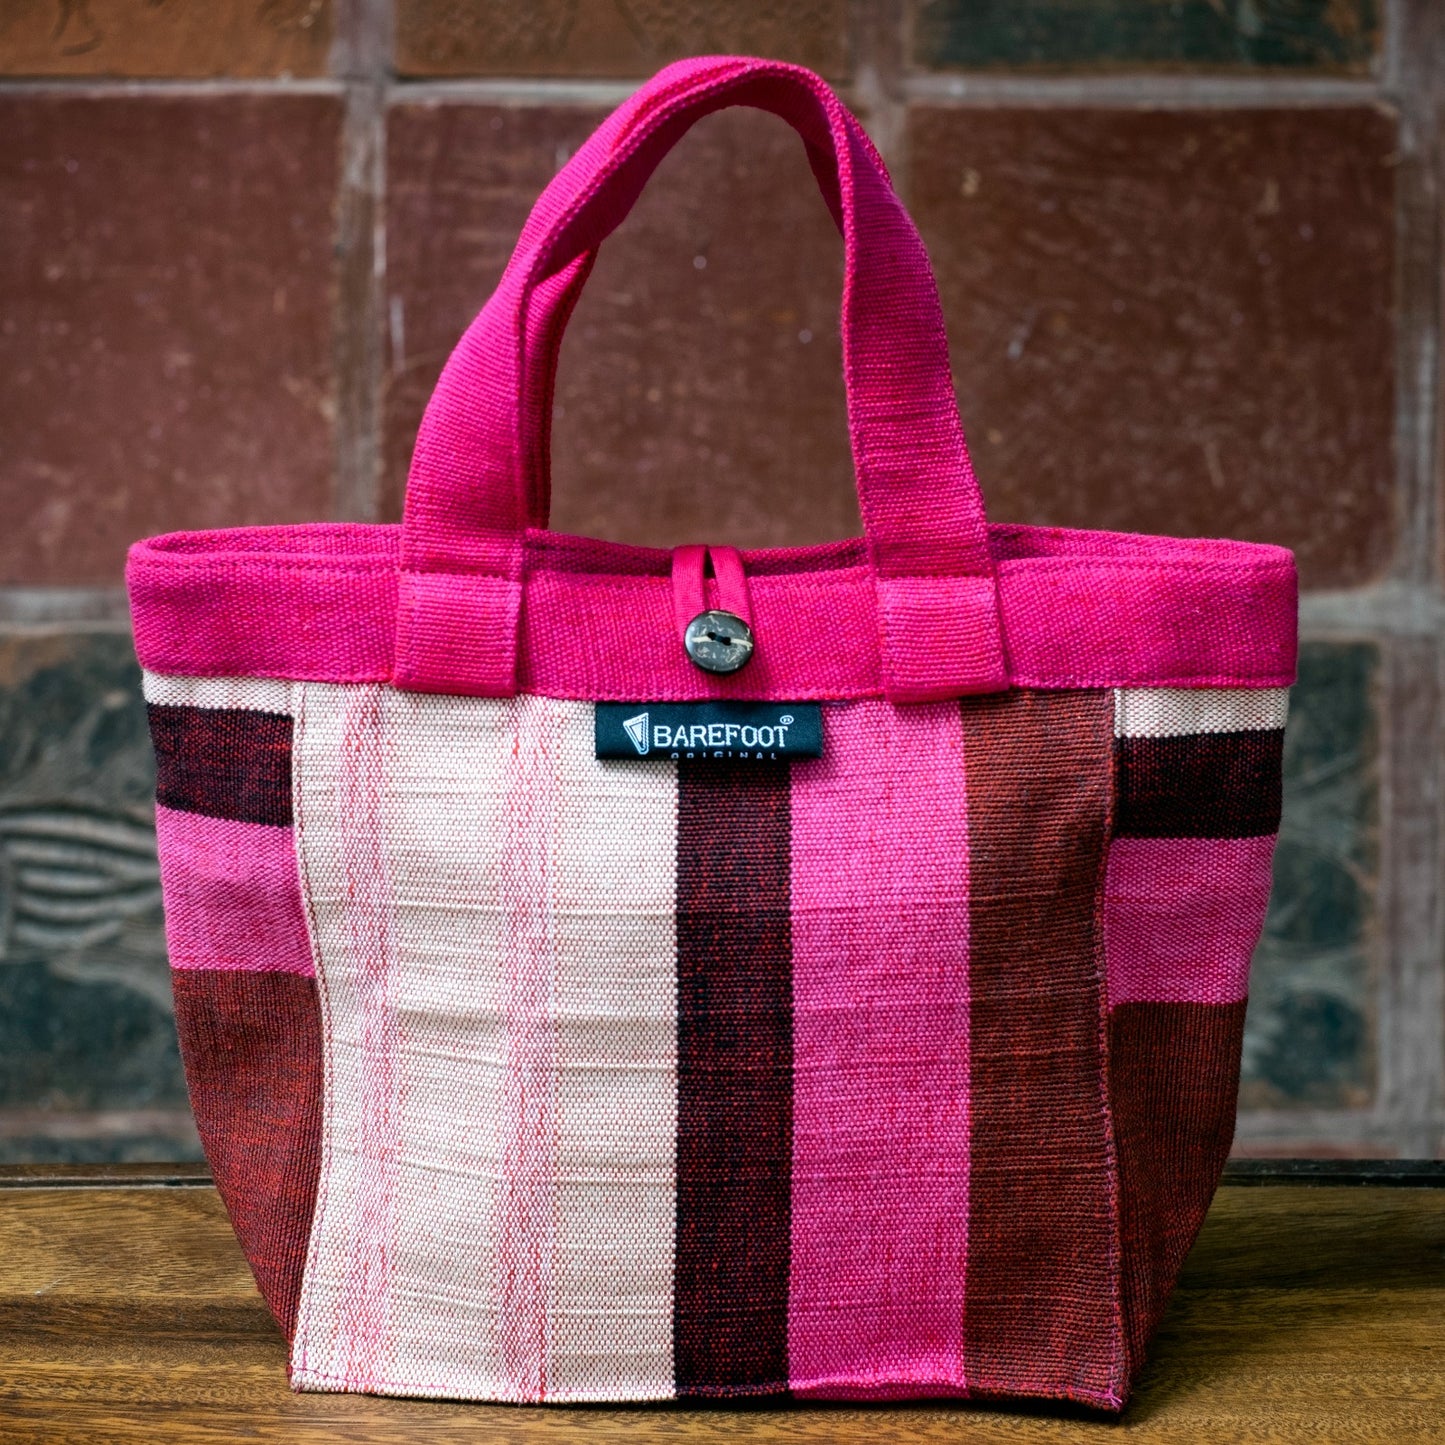 Lunch bag - perfect for work or school.